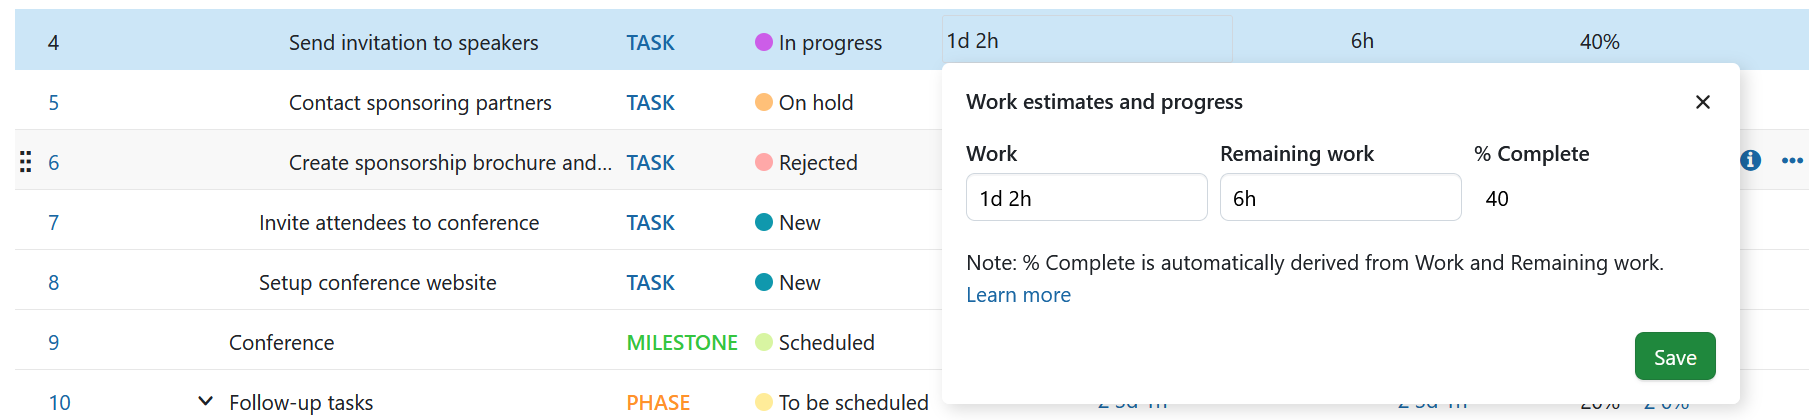 Work estimates and progress pop-over with work-based progress reporting